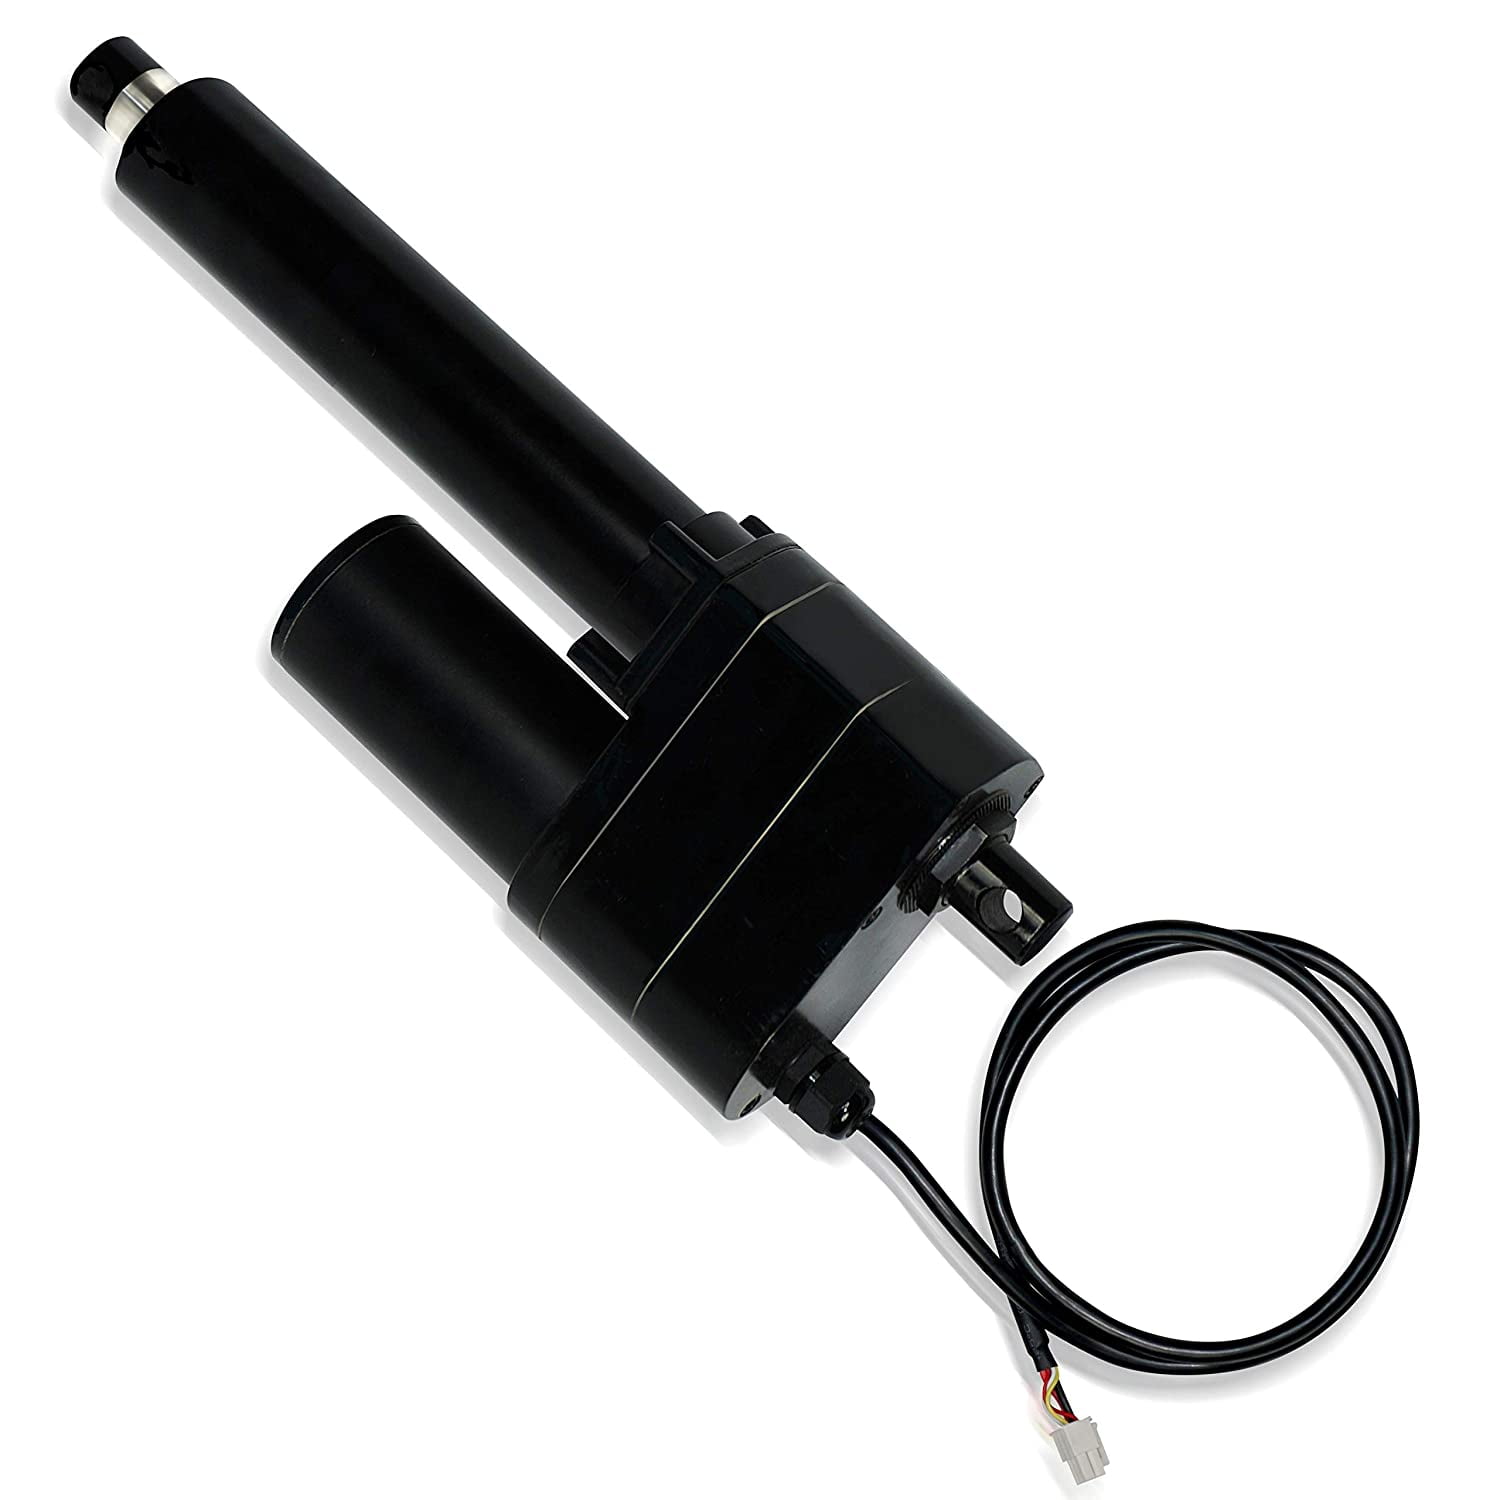 12 VDC Progressive Automations Linear Actuator Force 400 lbs Speed 0.98/sec Stroke Size 30 IP66